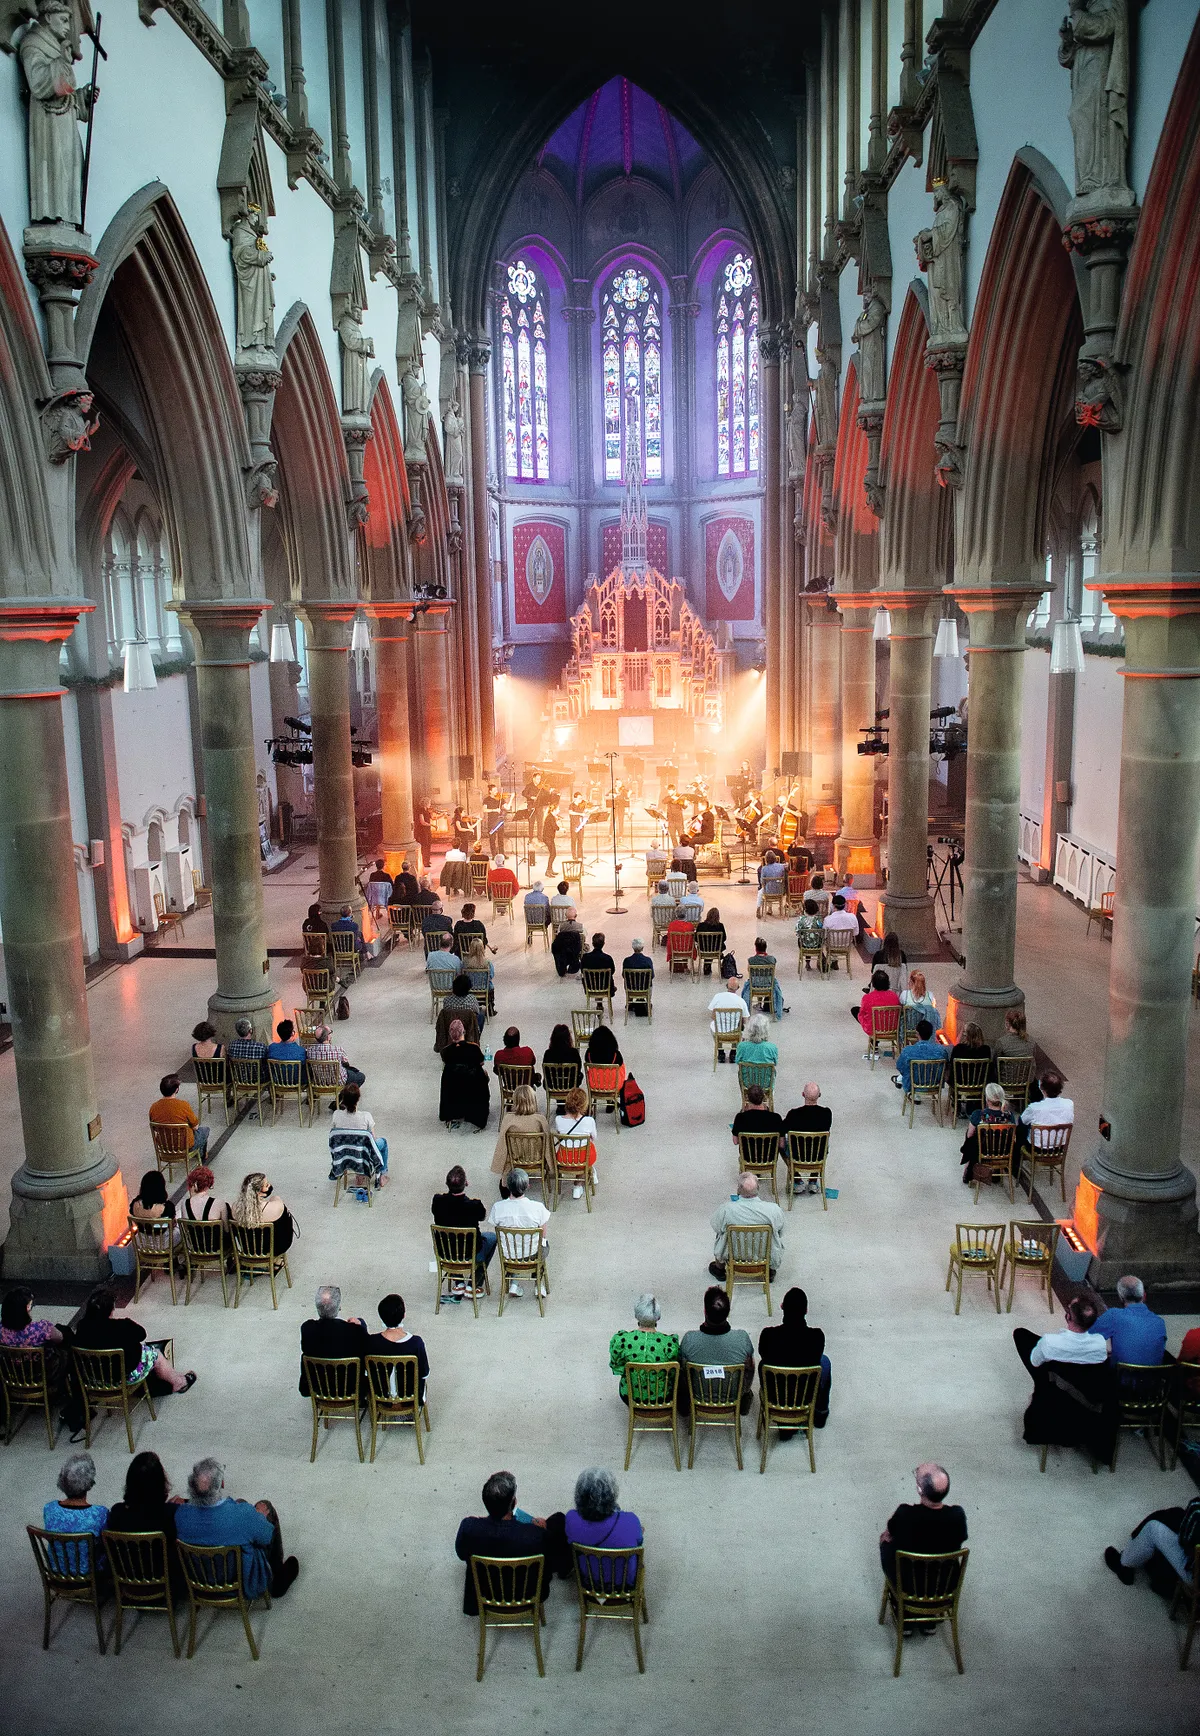 MANCHESTER, ENGLAND - JUNE 10: Manchester Camerata perform a sold out socially distanced show in their new home at The Monastery on June 10, 2021 in Manchester, England. (Photo by Shirlaine Forrest/Getty Images)